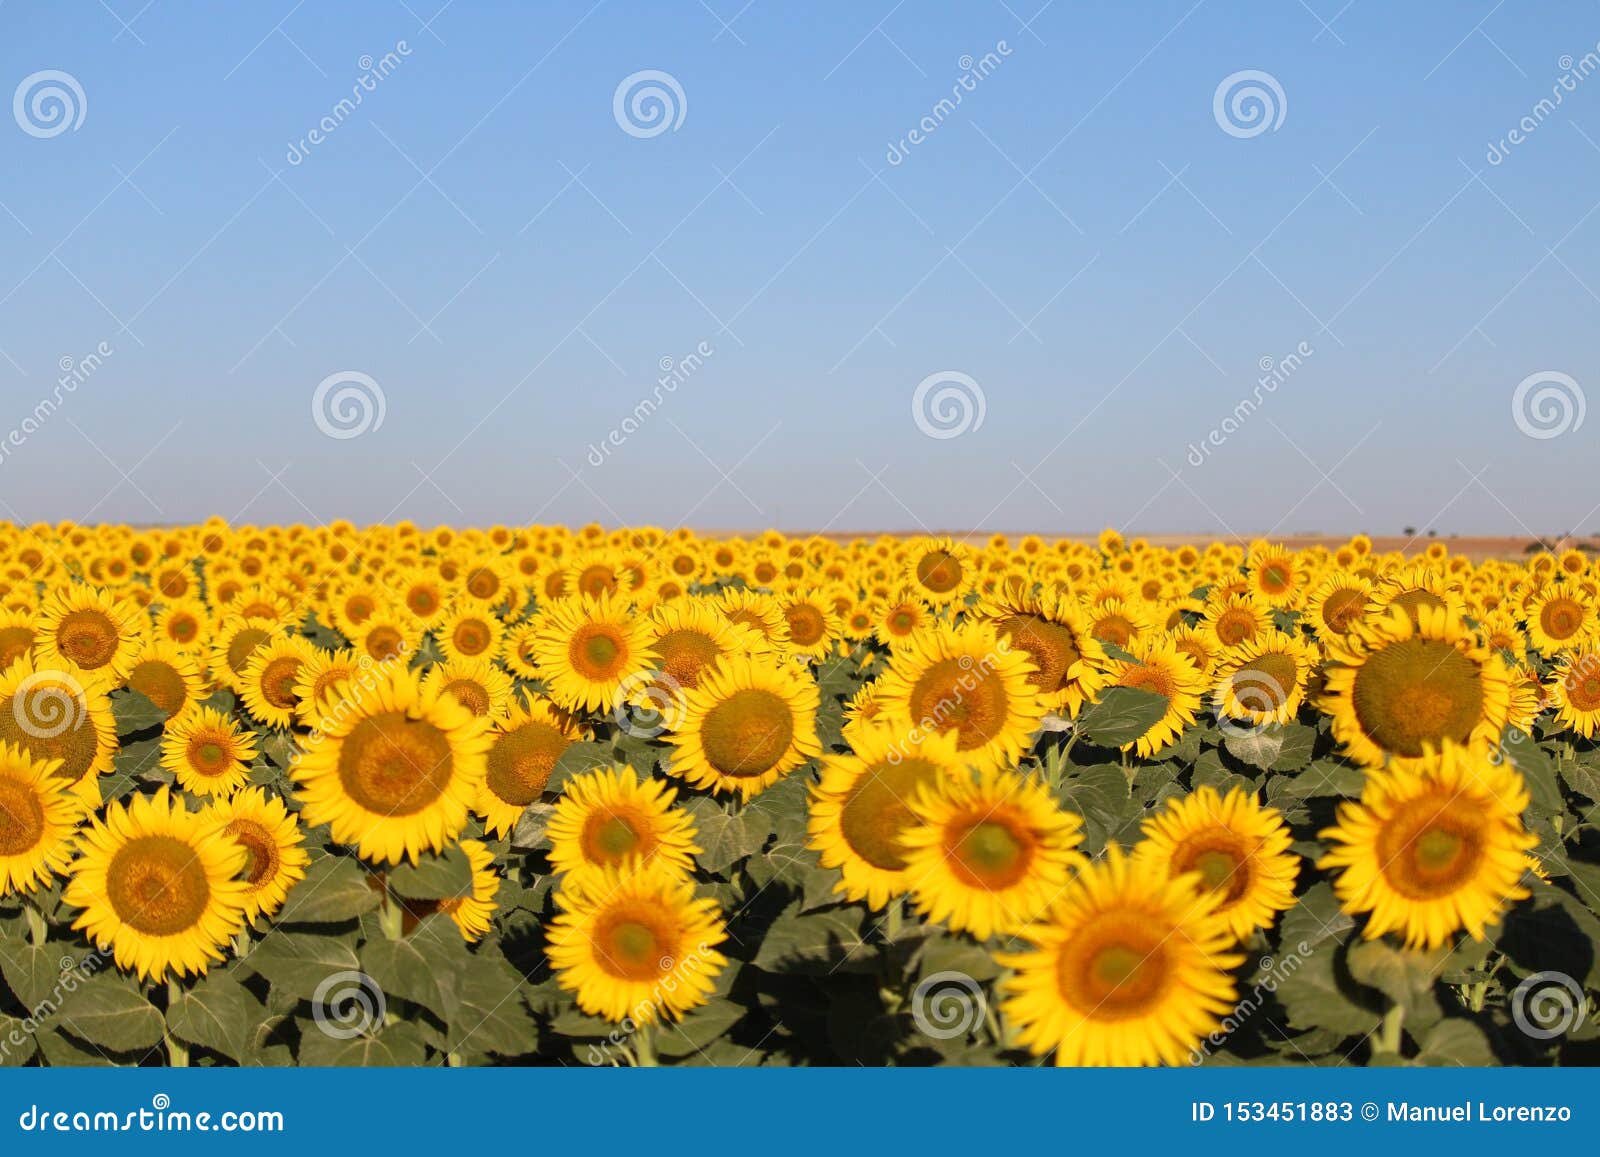 beautiful picture of sunflowers and soaking up the sun in the field